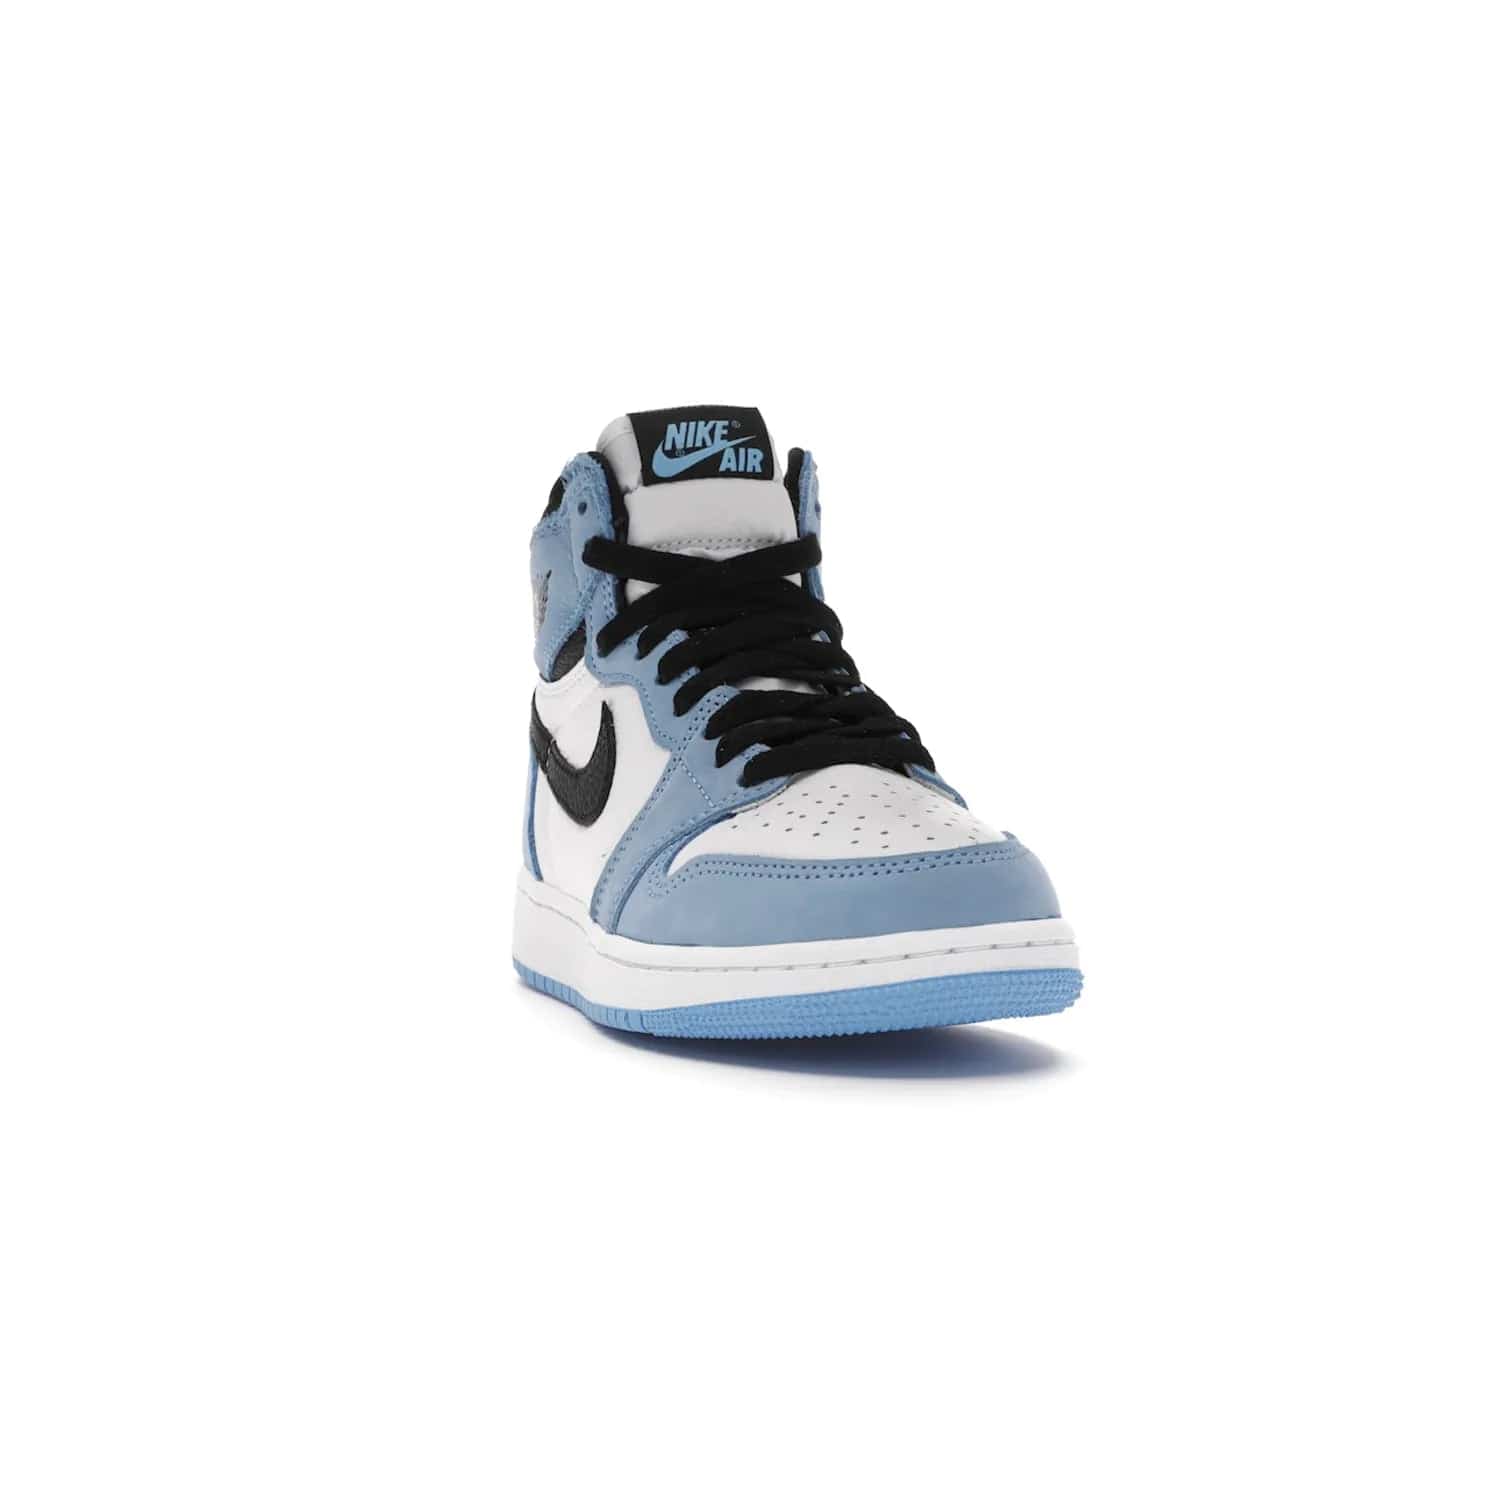 Jordan 1 Retro High White University Blue Black (GS) - Image 8 - Only at www.BallersClubKickz.com - Air Jordan 1 Retro High White University Blue Black GS: the latest offering from the iconic Air Jordan 1 line. White tumbled leather upper with University Blue overlays and black detailing. University Blue outsole and white midsole. March 6 release.